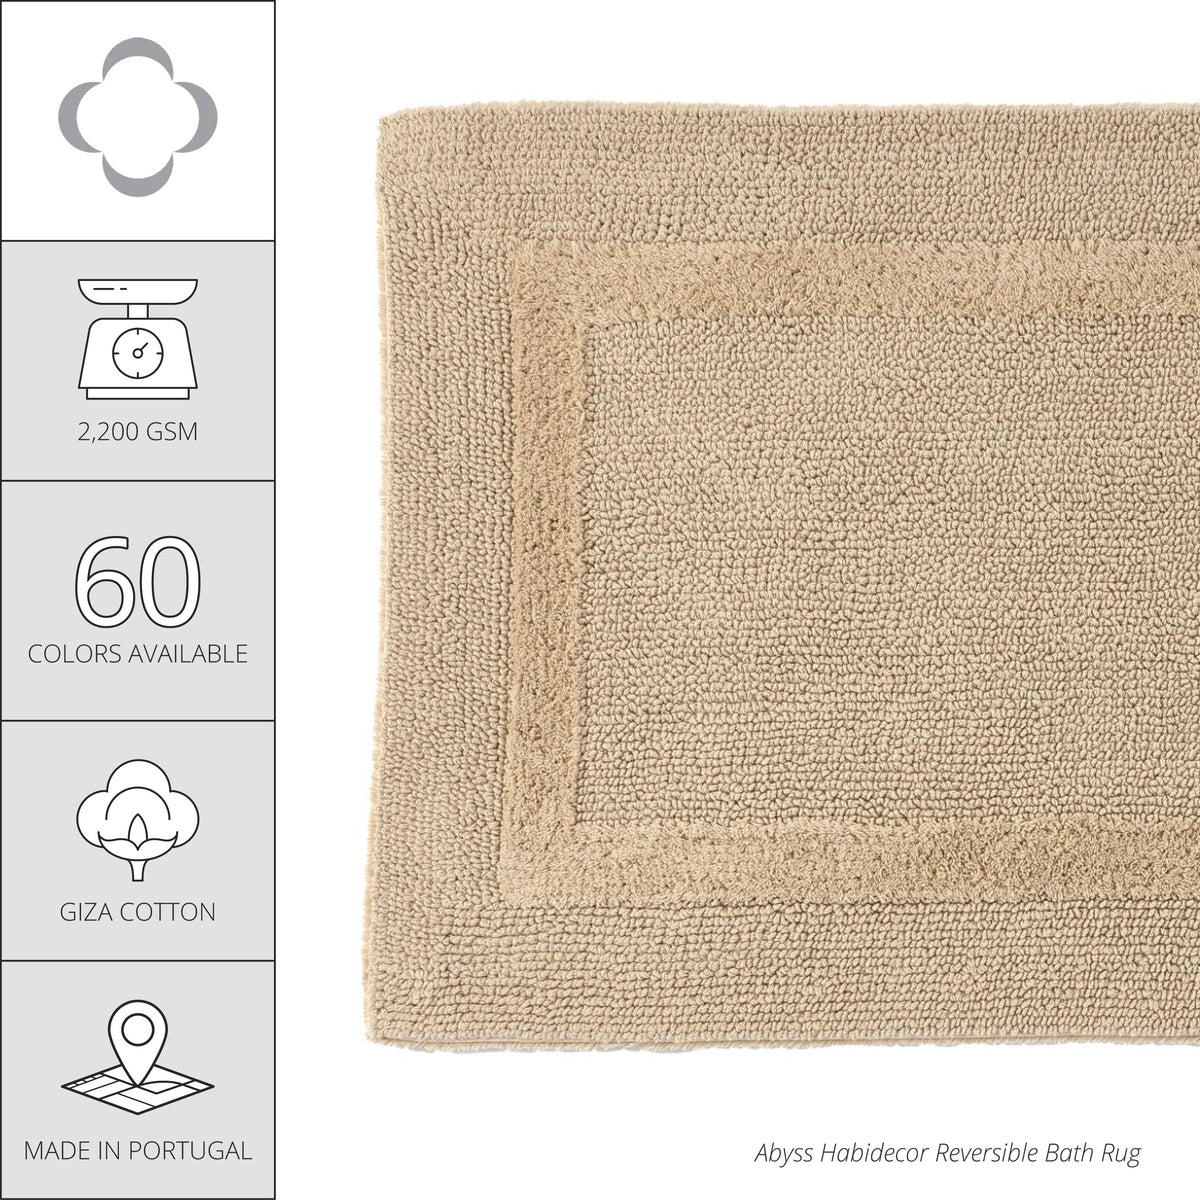 Abyss Habidecor Reversible Bath Rug - Figue (401)